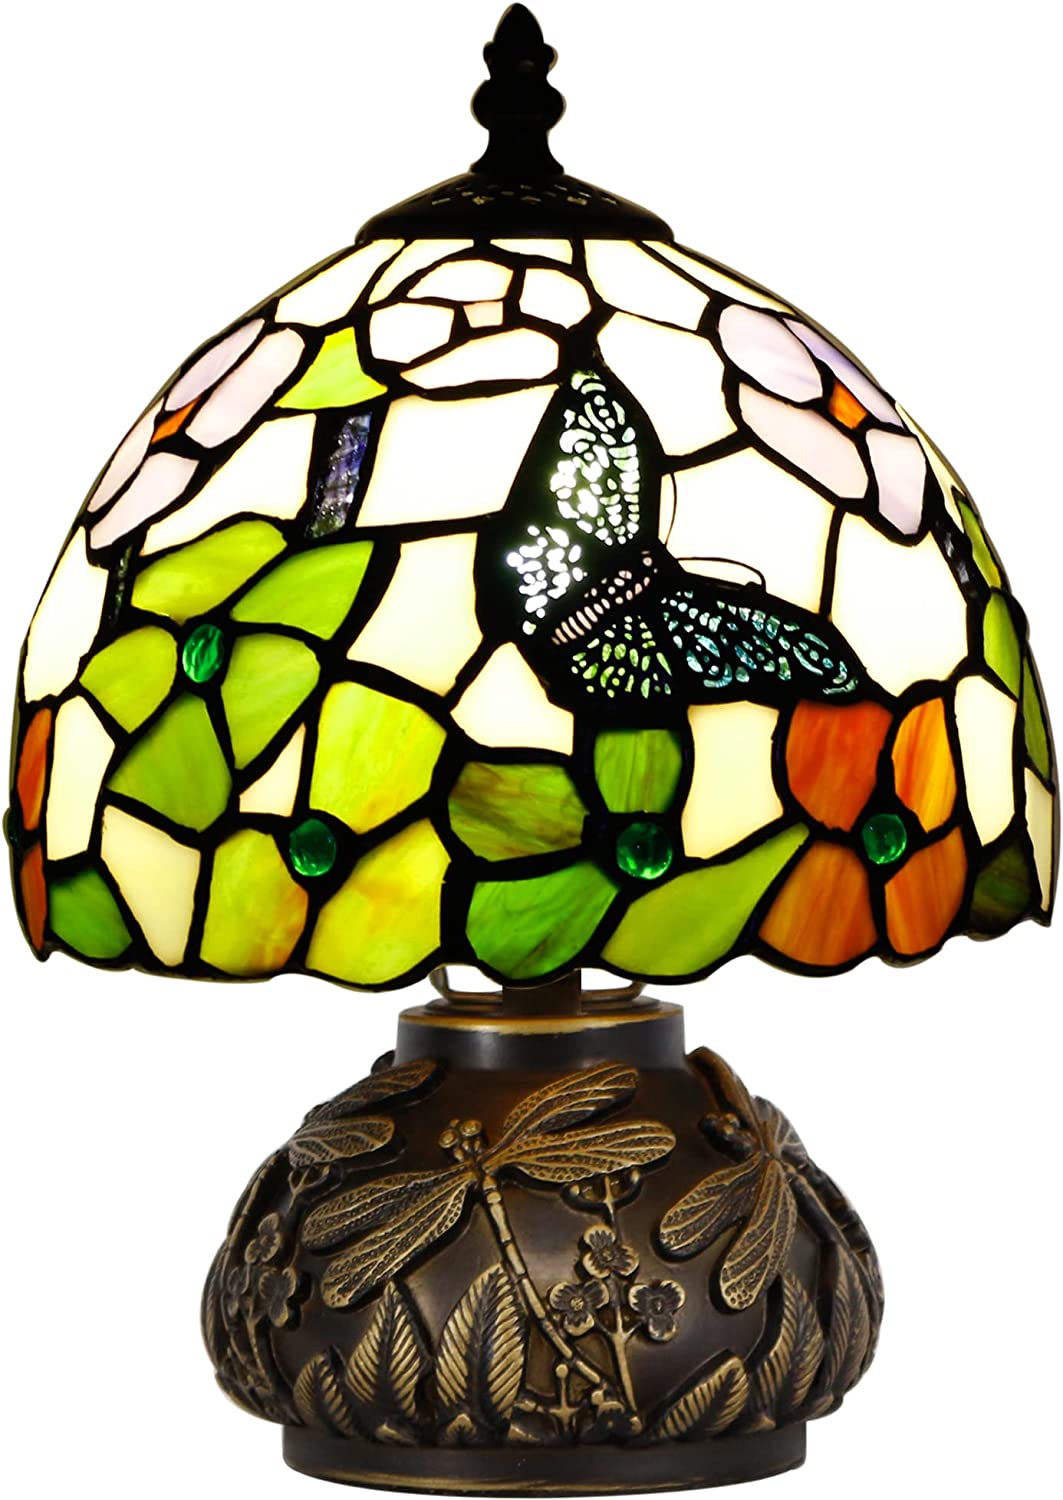 Werfactory® Tiffany Table Lamp W8H11 Inch Stained Glass red Green Flower Butterfly Mushroom Lamp